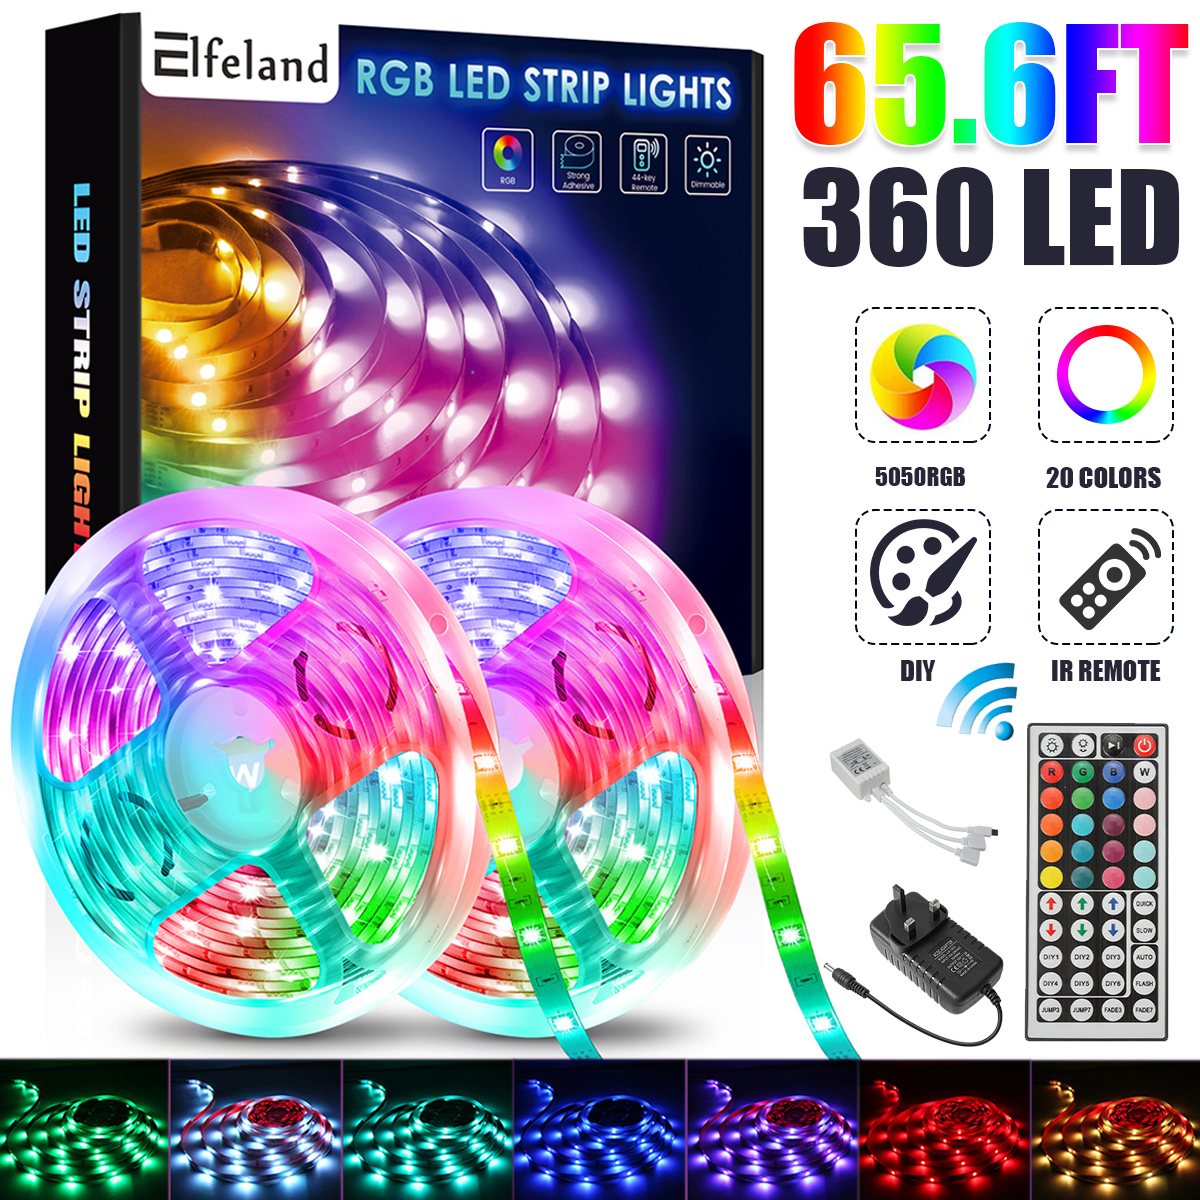 Find Elfeland 20m 65 6FT SMD Led Strip Lights 360LED RGB 5050 Strip Light Non Waterproof Flexible DC12V With 44 Key Remote Control for Sale on Gipsybee.com with cryptocurrencies